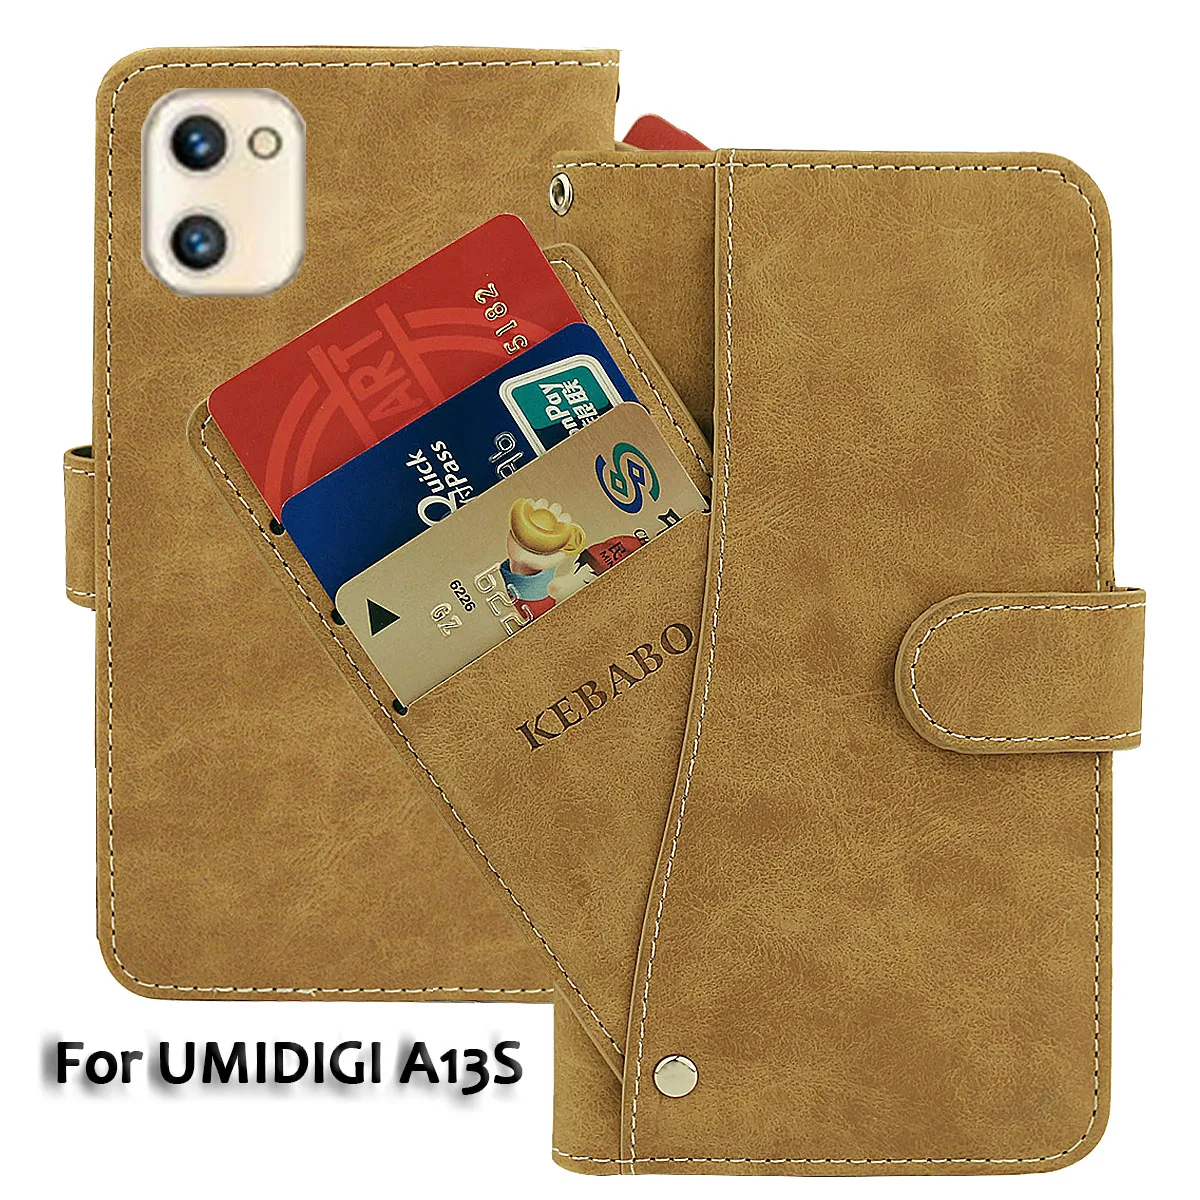 

Vintage Leather Wallet UMIDIGI A13S Case 6.7" Flip Luxury Card Slots Cover Magnet Phone Protective Cases Bags